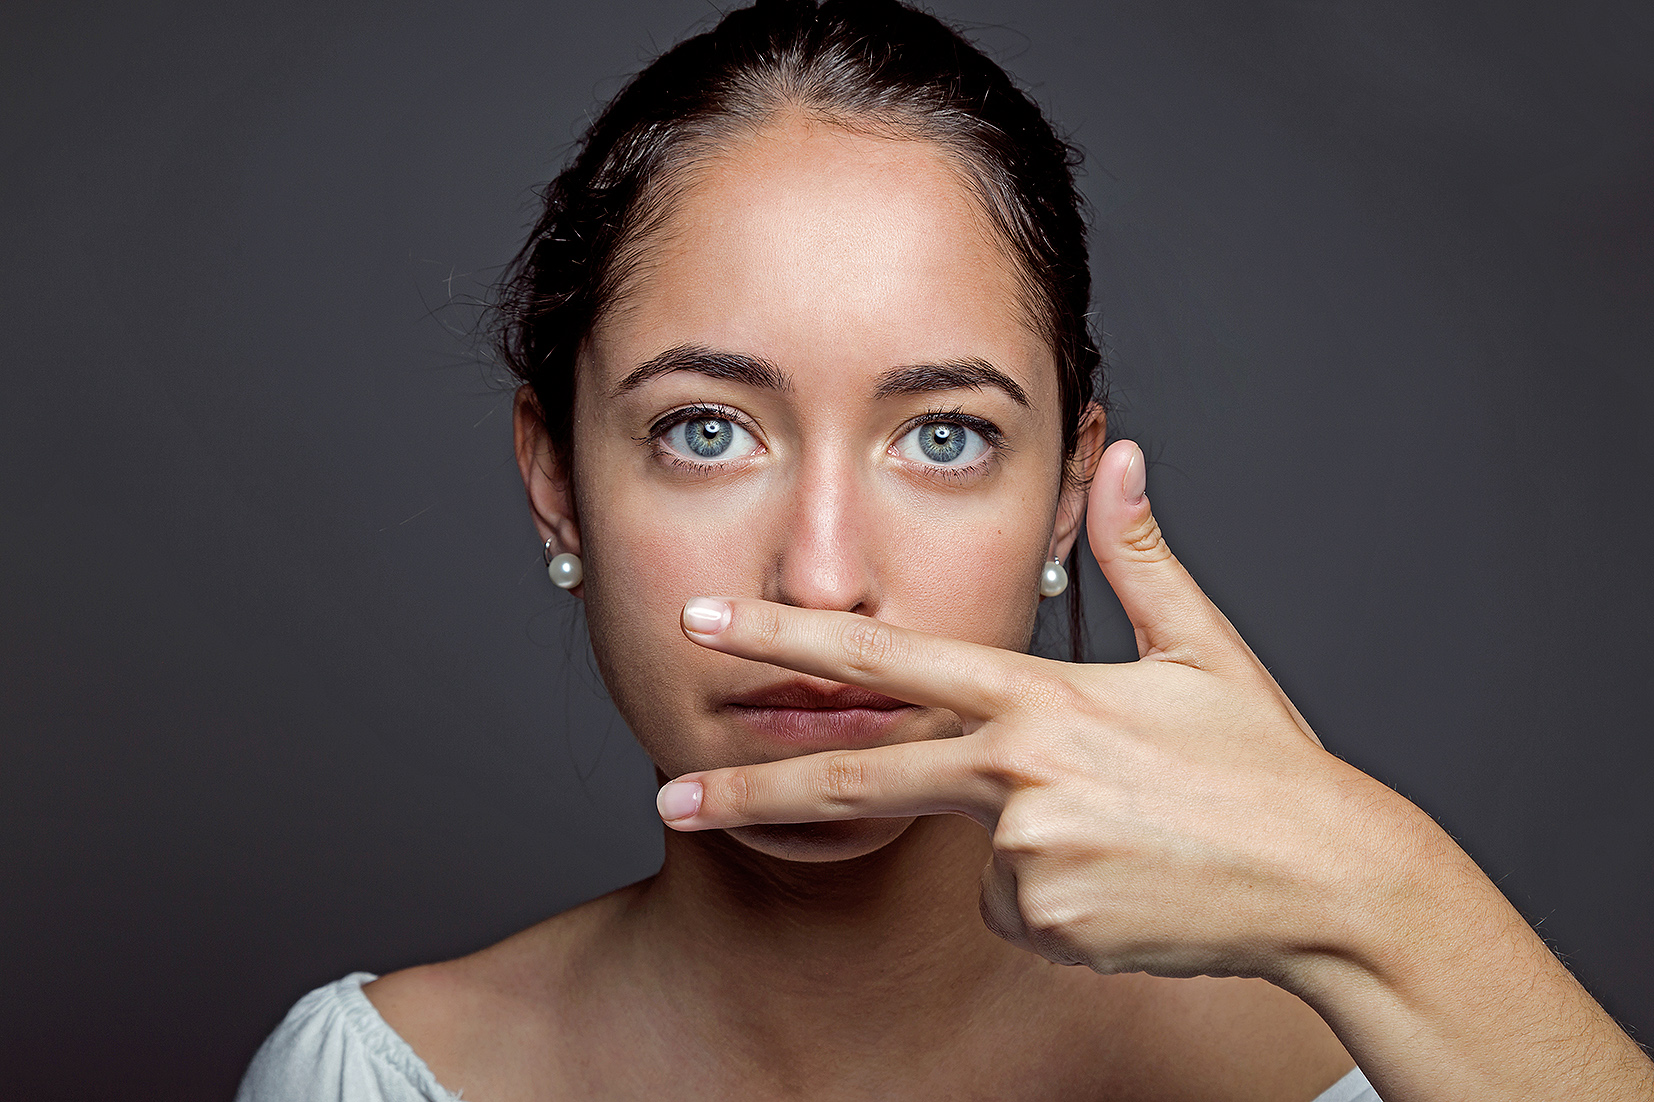 Portrait of beautiful young woman covering her mouth with hand. Isolated.